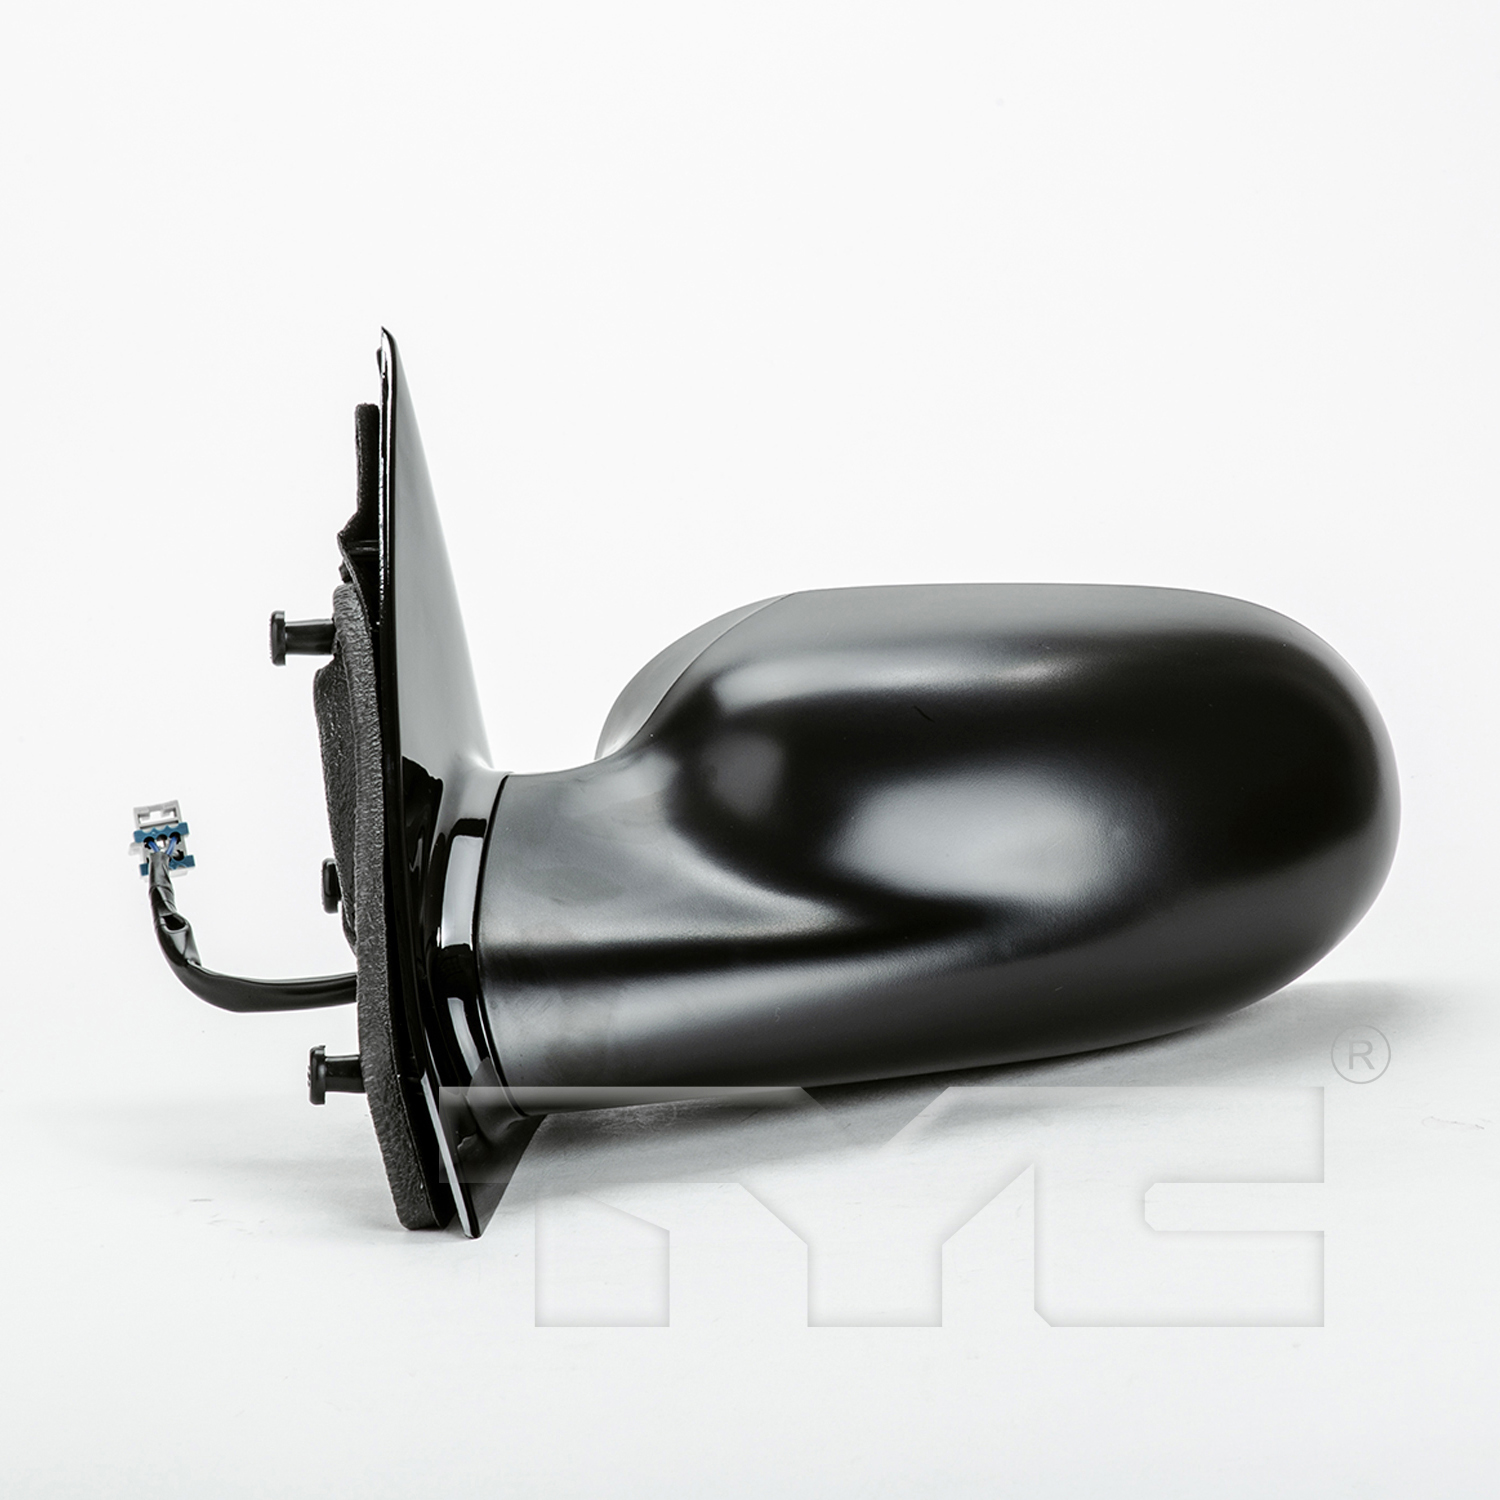 Aftermarket MIRRORS for SATURN - LW300, LW300,01-03,LT Mirror outside rear view